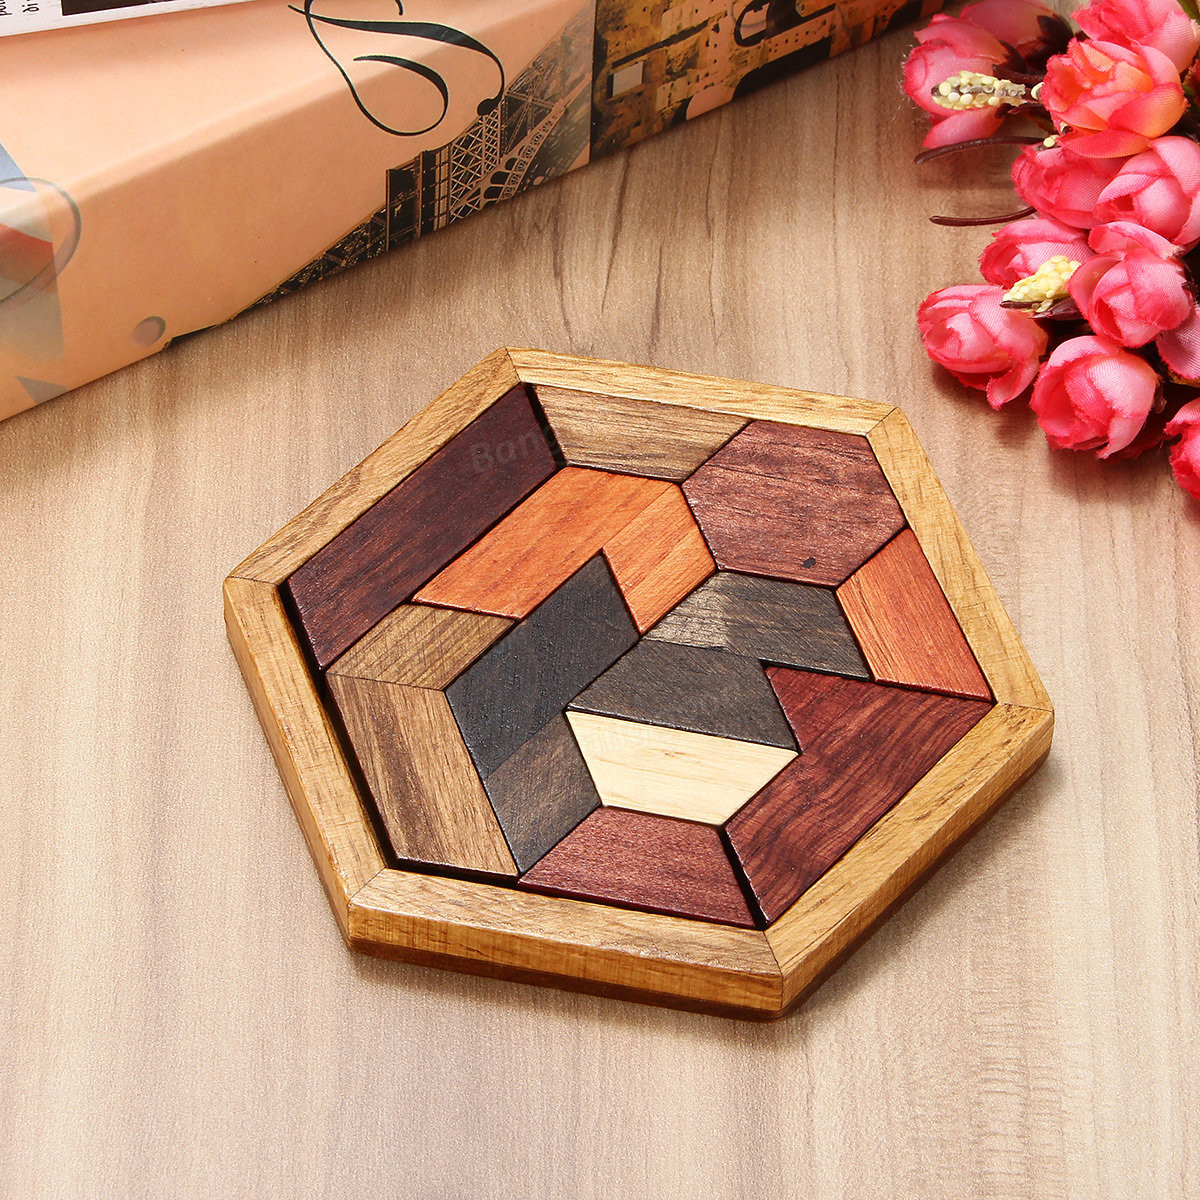 The top 21 Ideas About Diy Wooden Puzzles - Home, Family, Style and Art